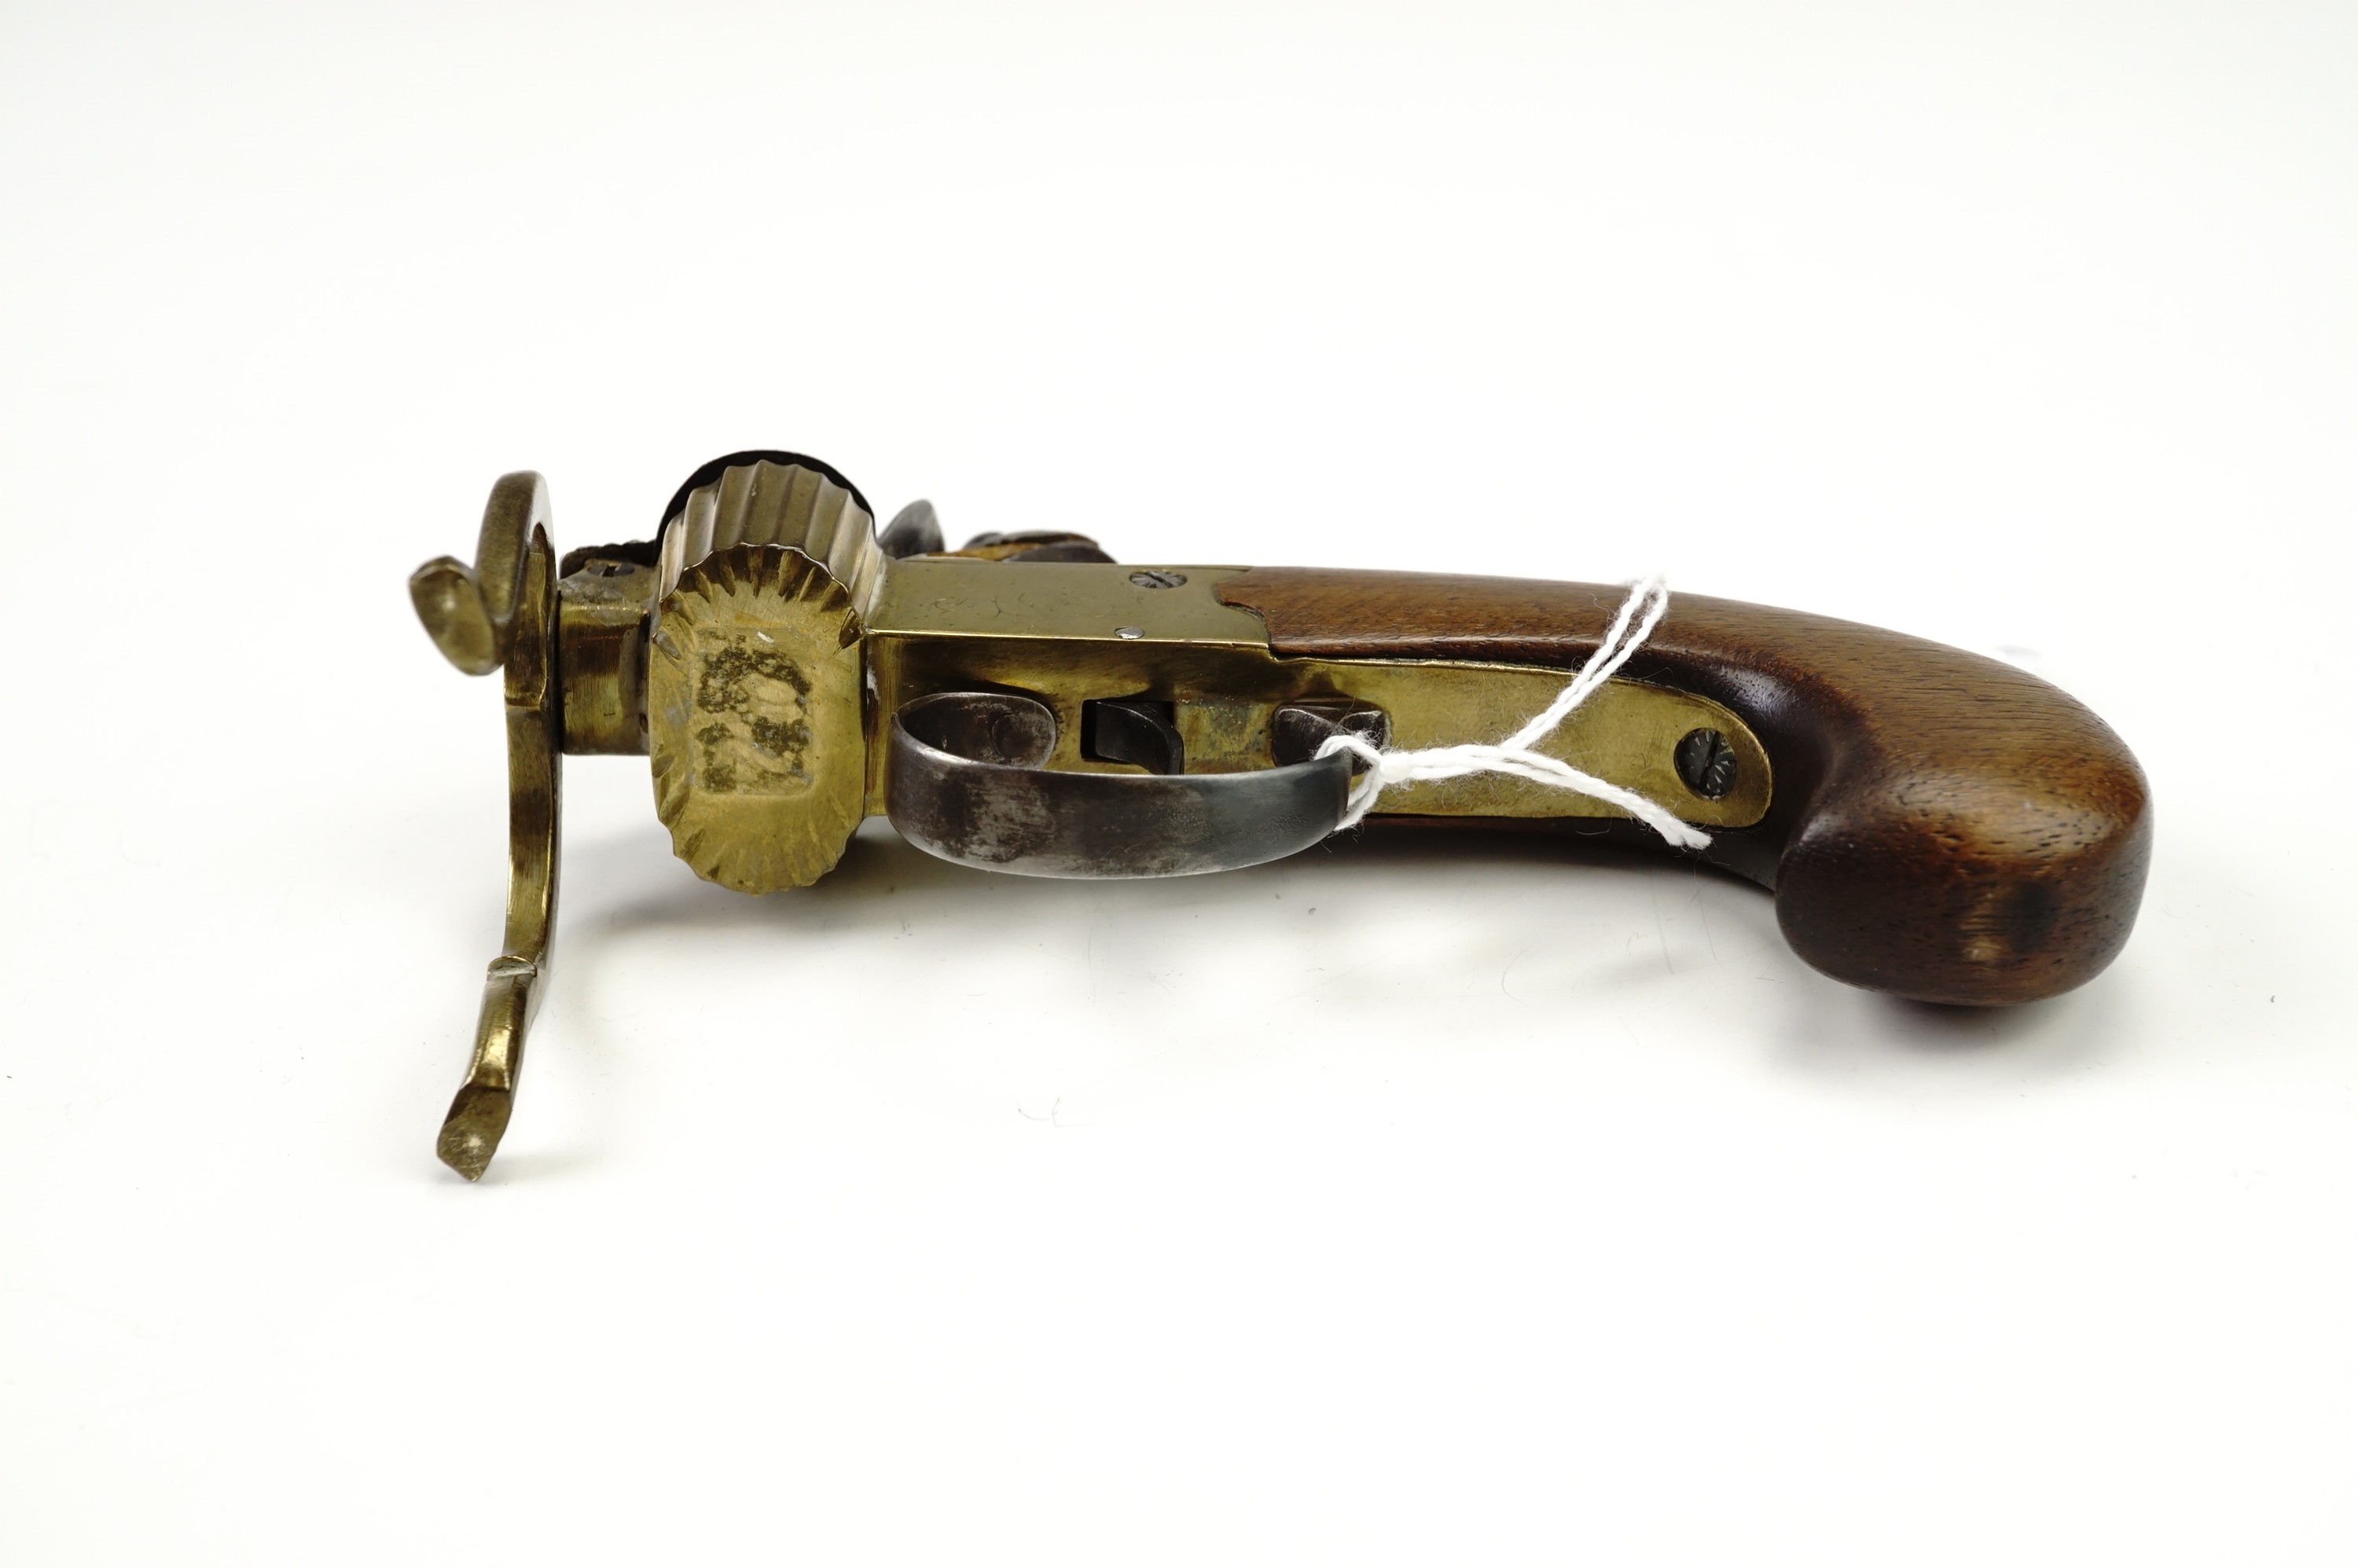 A flintlock tinder box candle lighter, having a brass body with steel cock and frizen on a walnut - Image 3 of 7